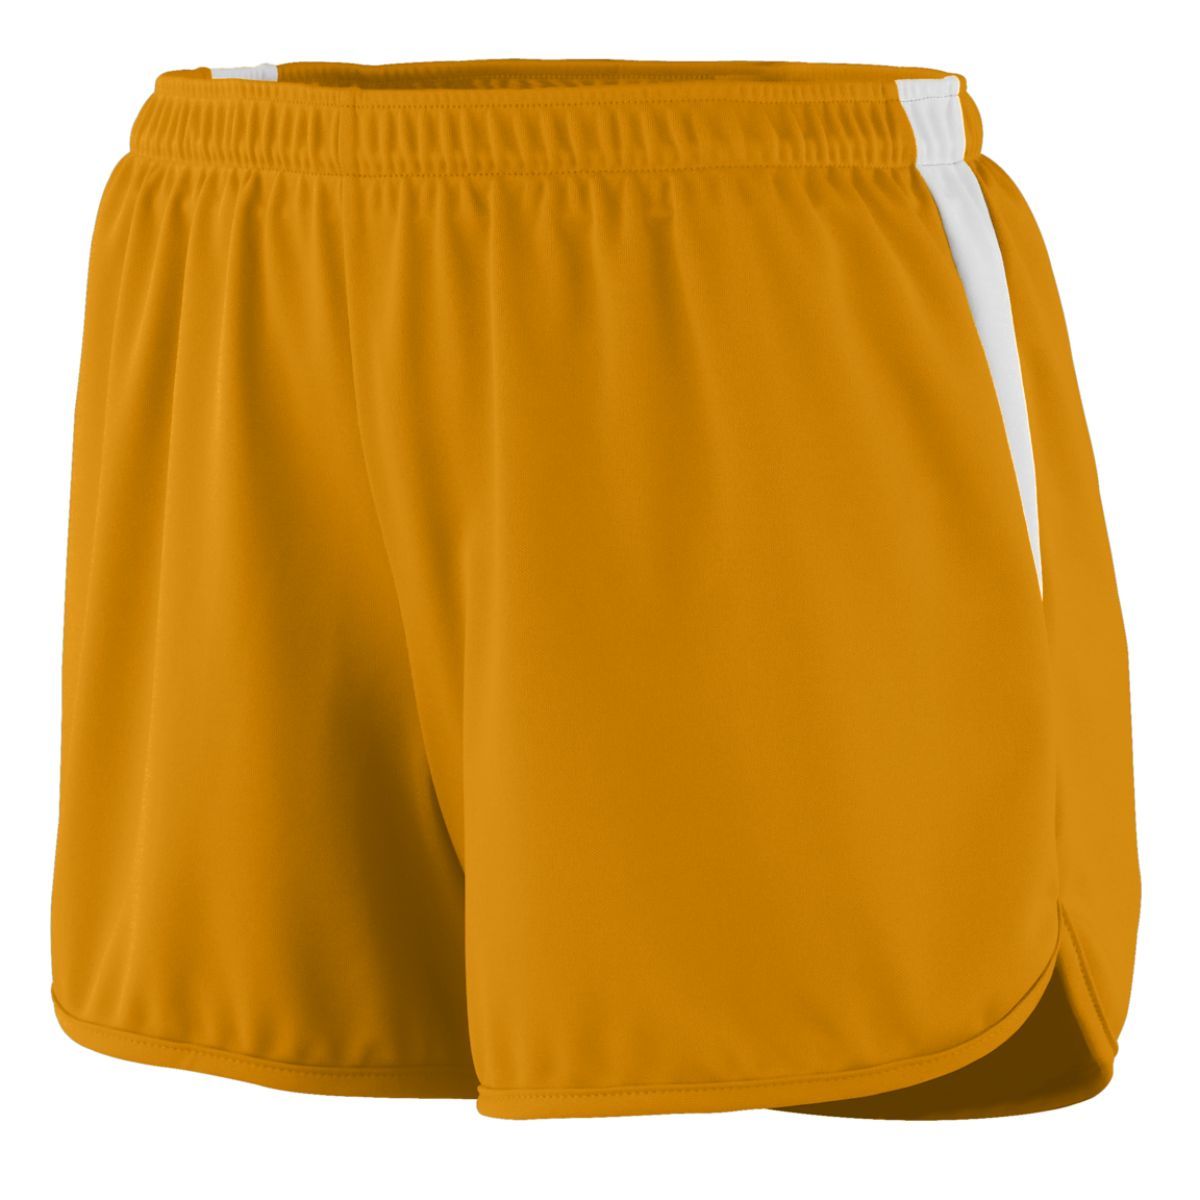 Augusta Sportswear Ladies Rapidpace Track Shorts in Gold/White  -Part of the Ladies, Ladies-Shorts, Augusta-Products, Track-Field product lines at KanaleyCreations.com